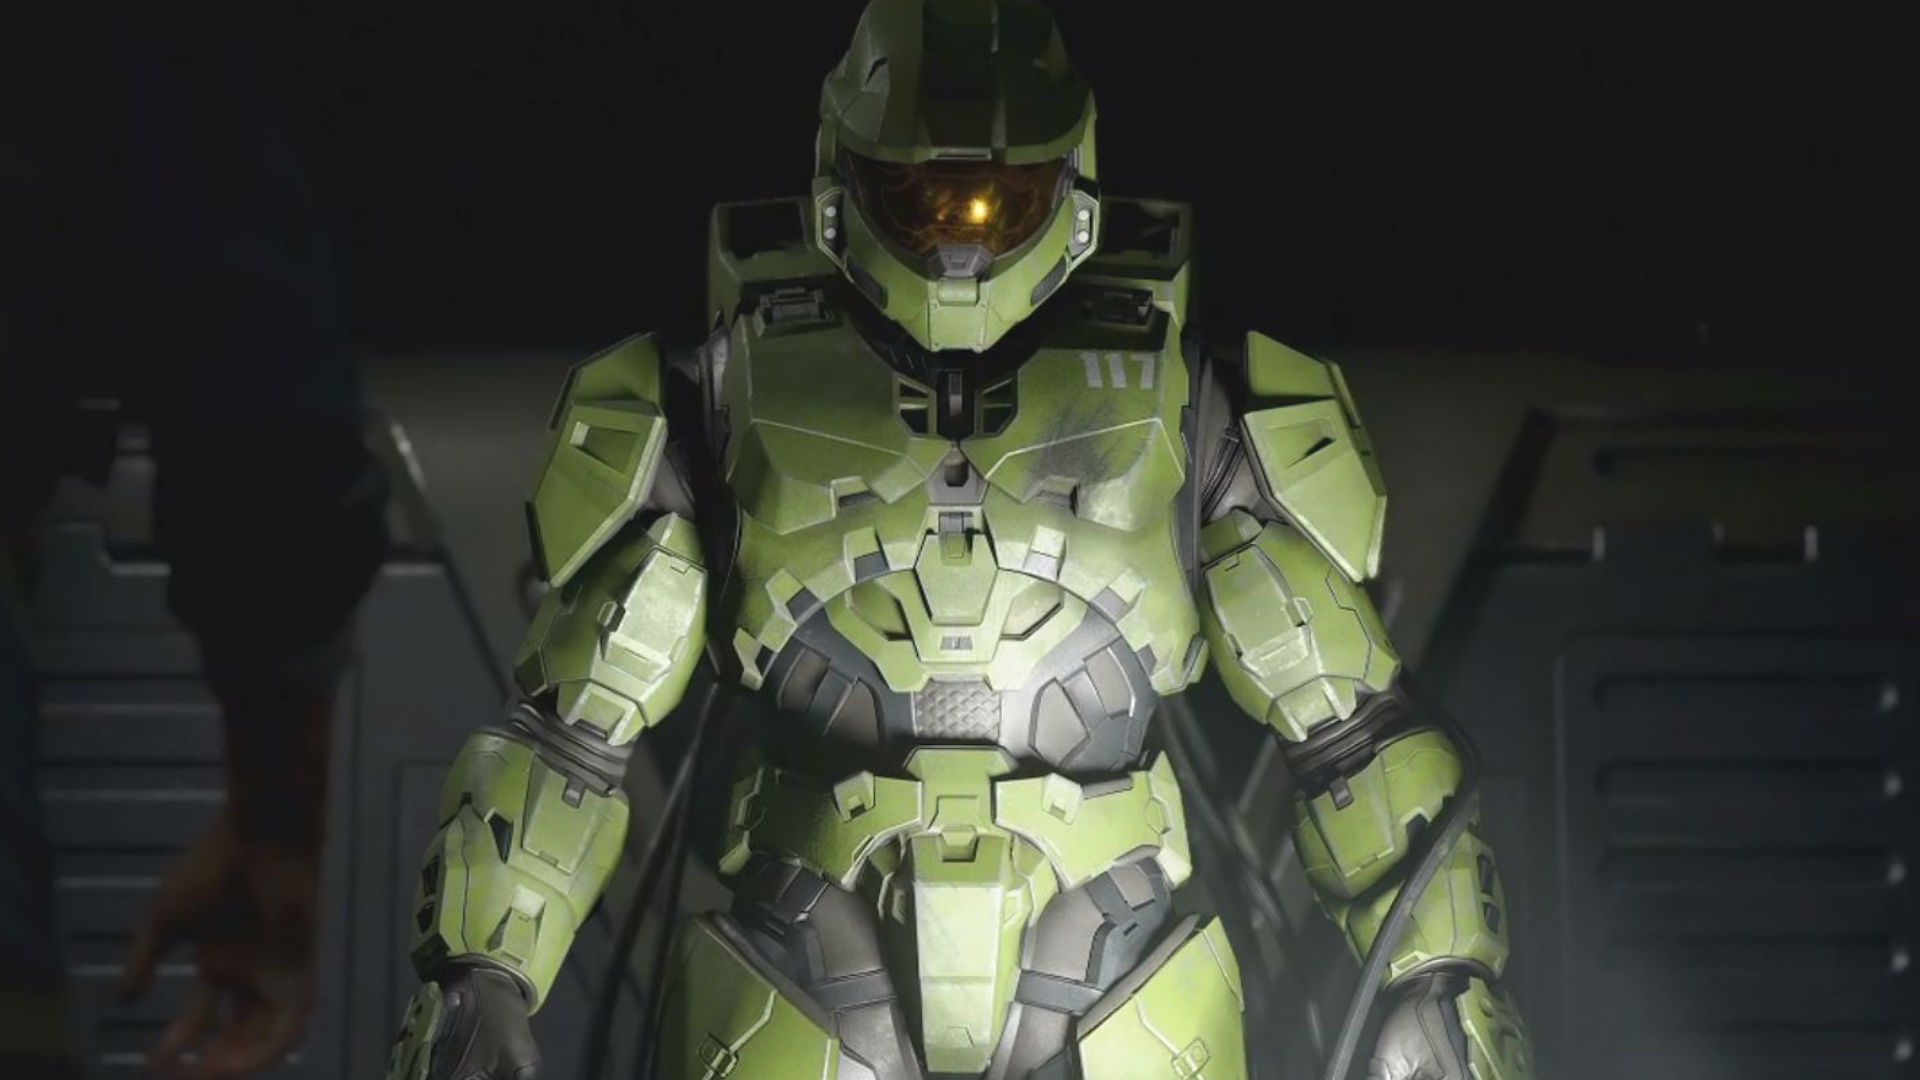 More than 18 months on from launch, we discover that Halo 5